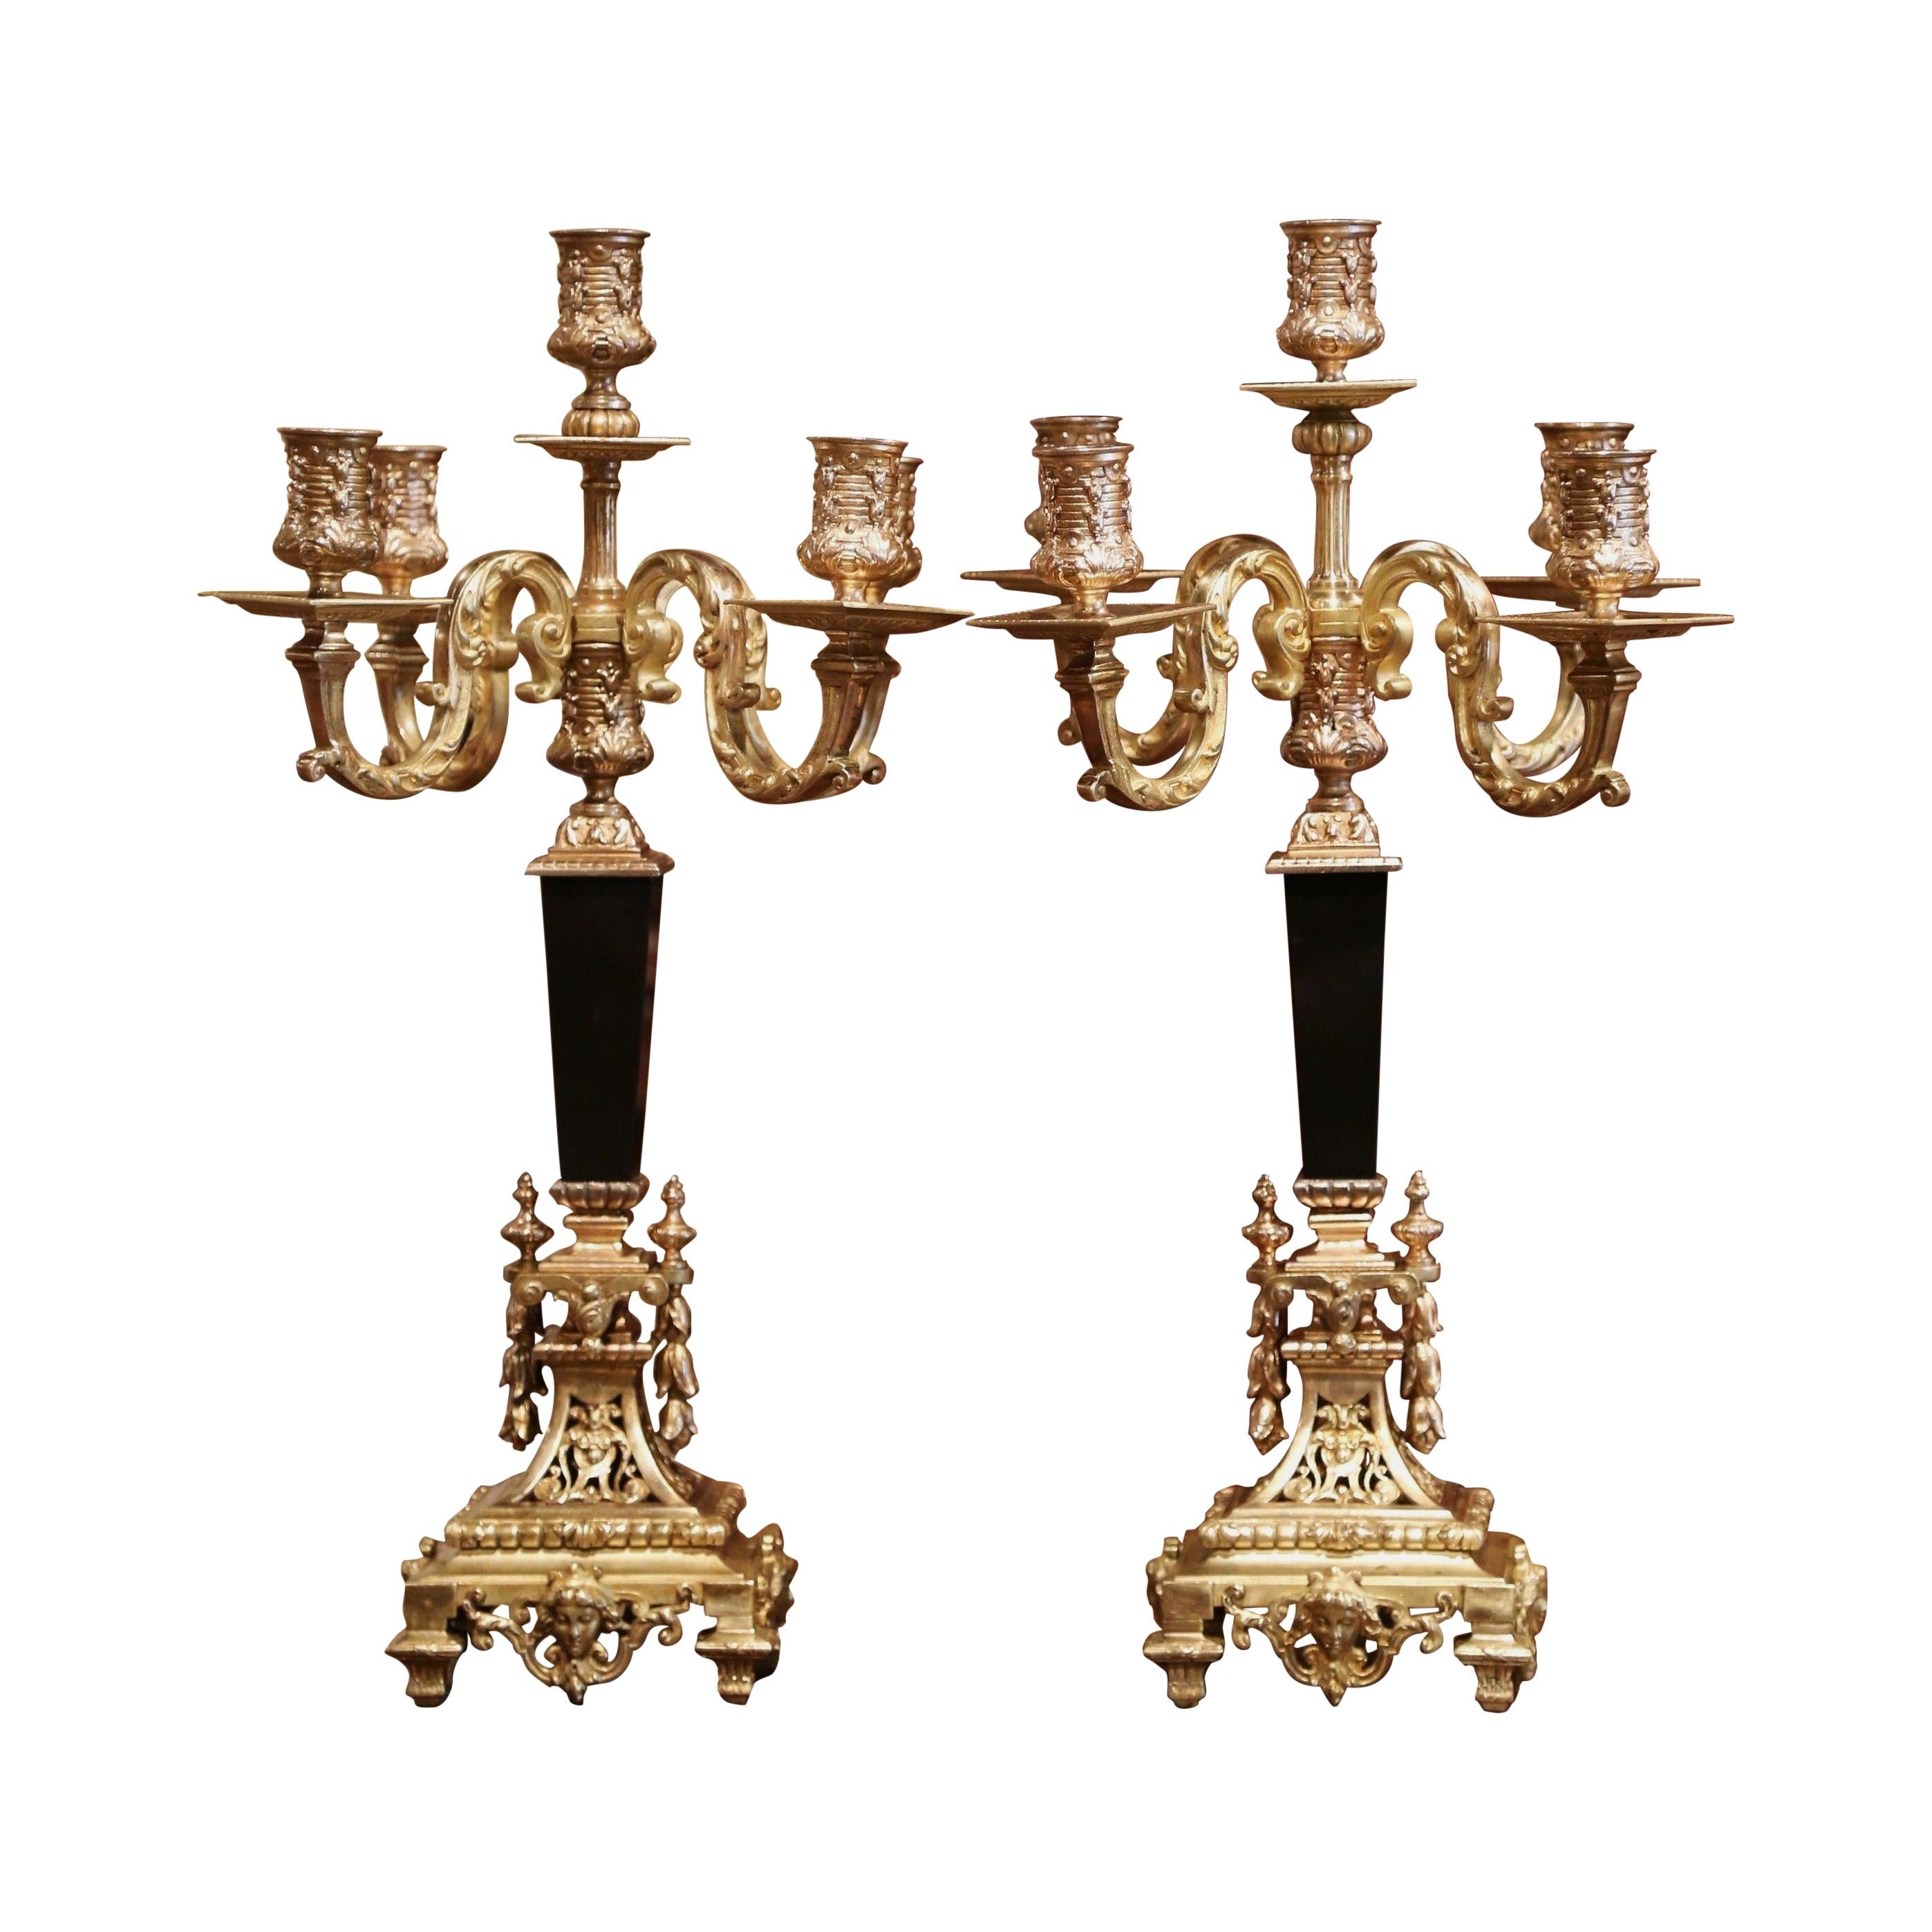 Pair of 19th Century French Bronze Dore and Black Marble Five-Arm Candelabras